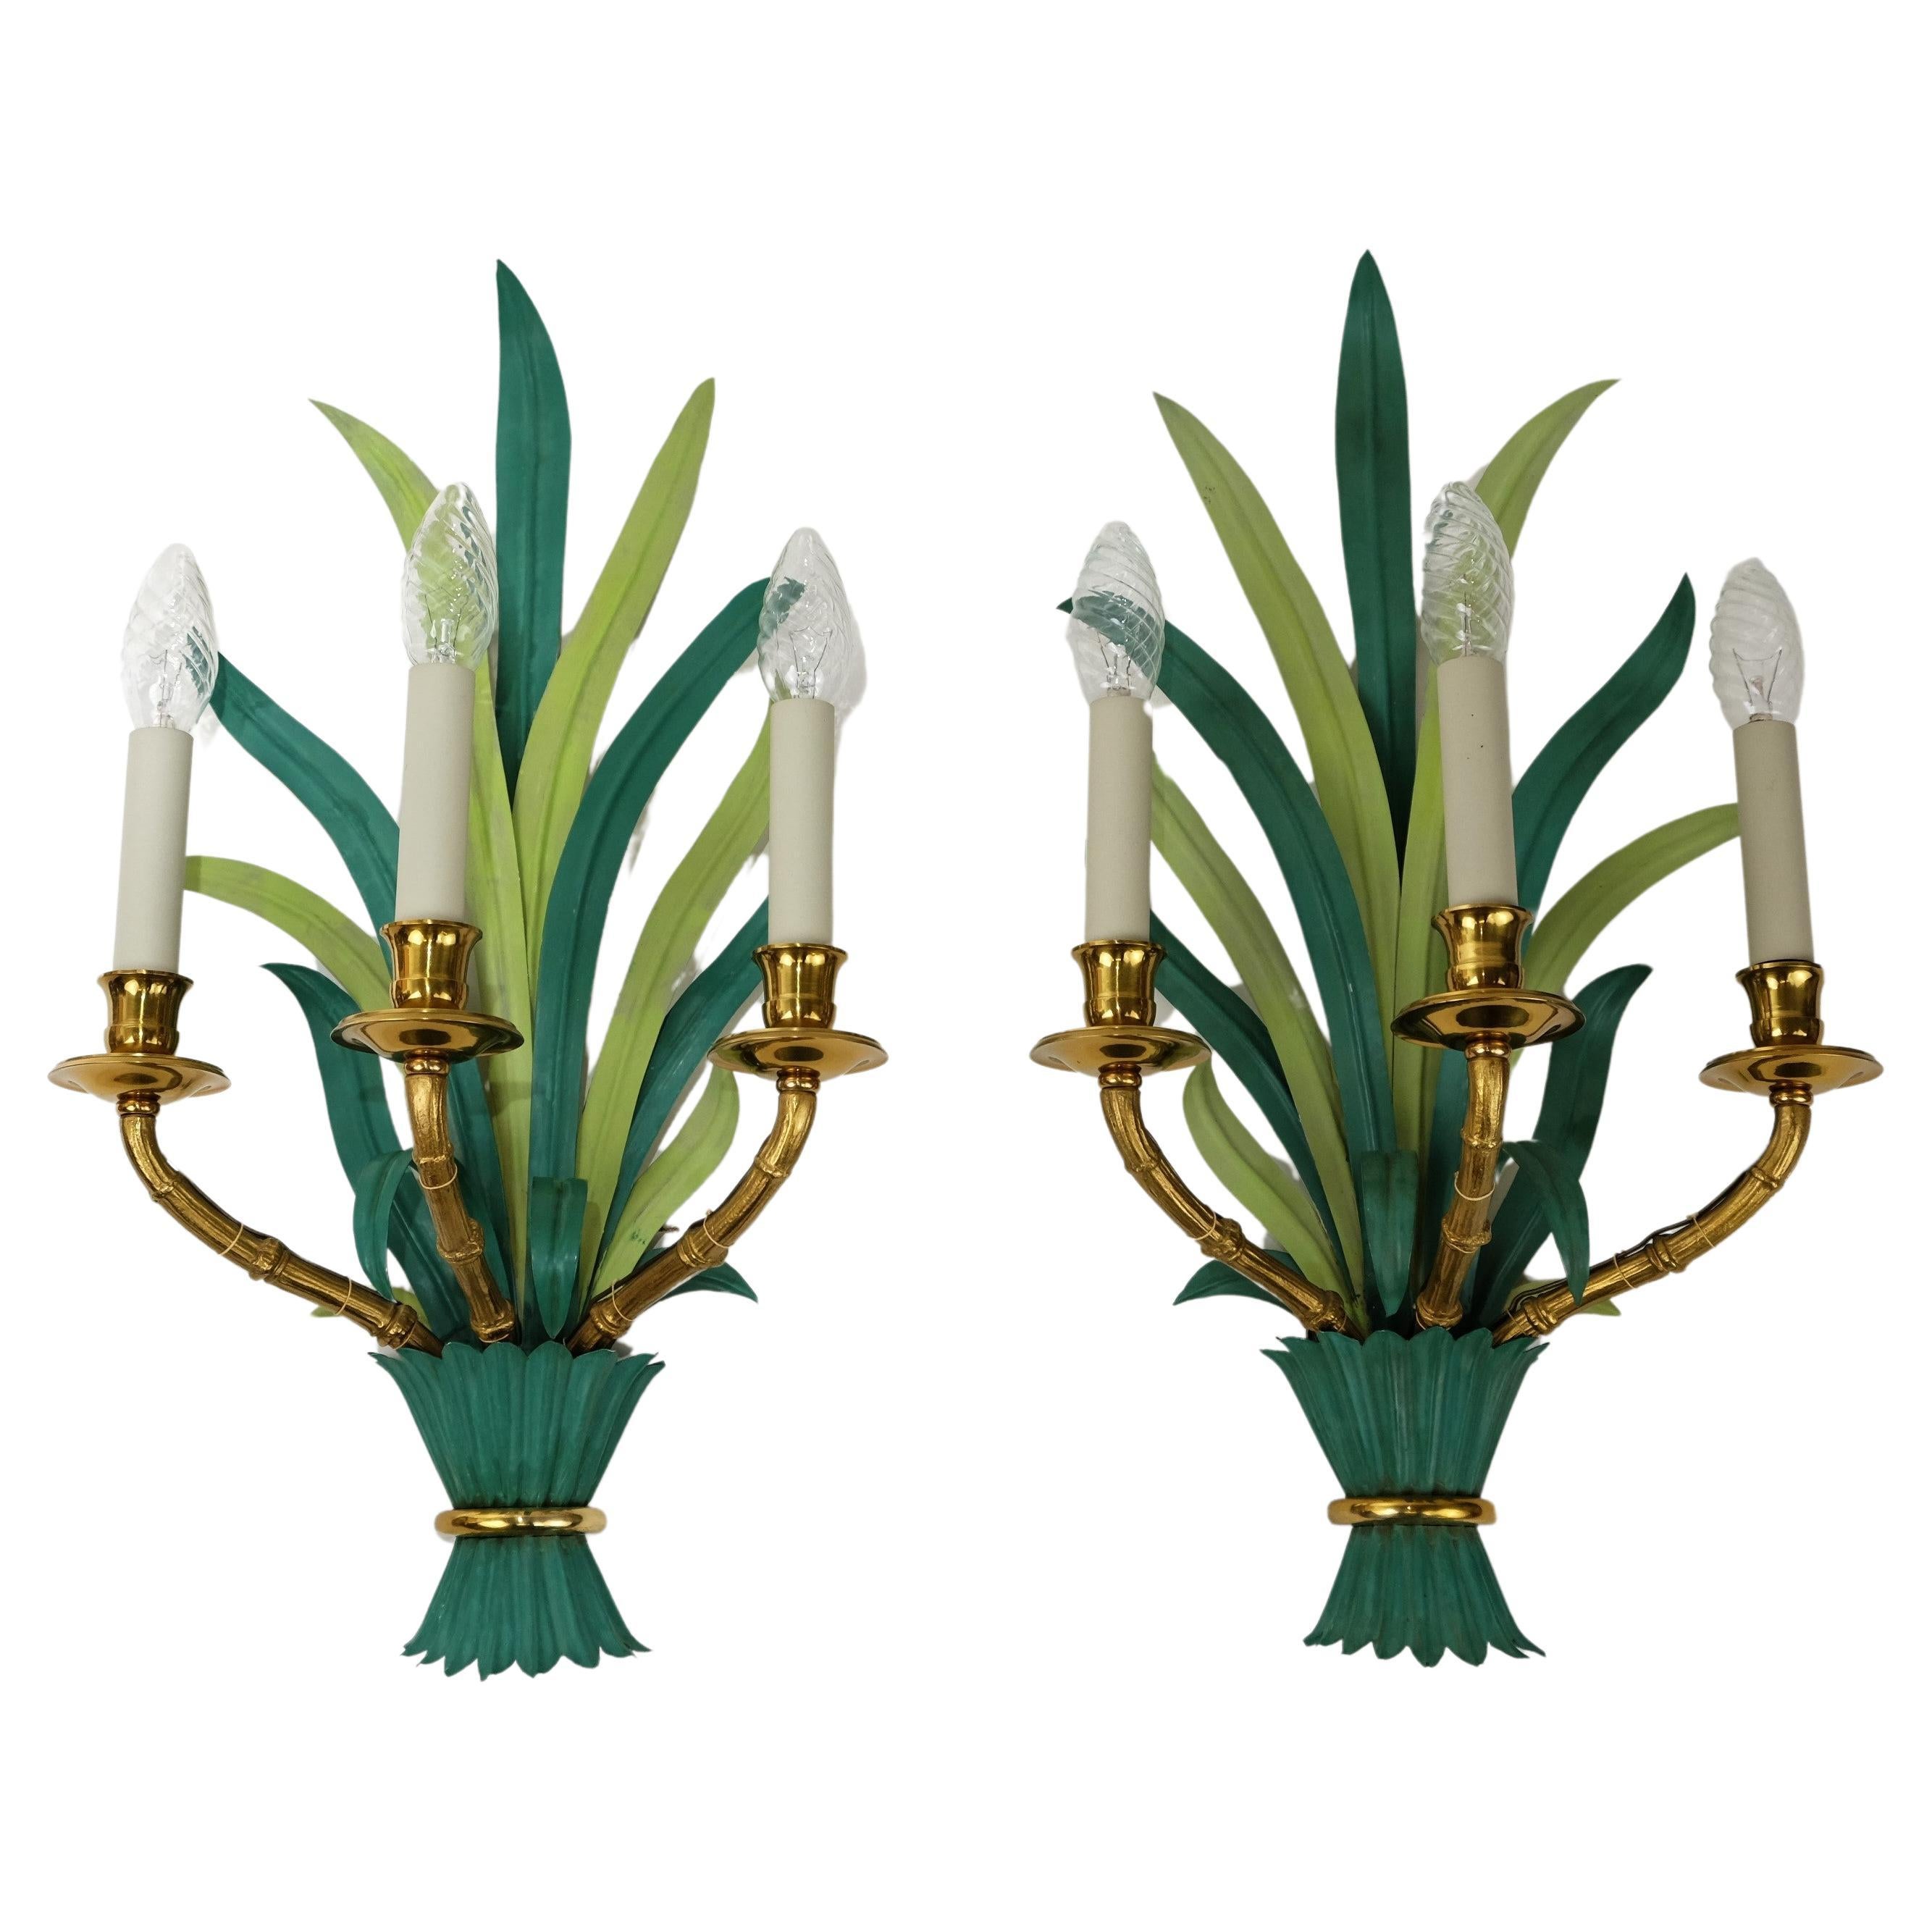 Pair of Wall Lamps / Sconces by Maison Bagues Bamboo Palm Leaves, France 1950s